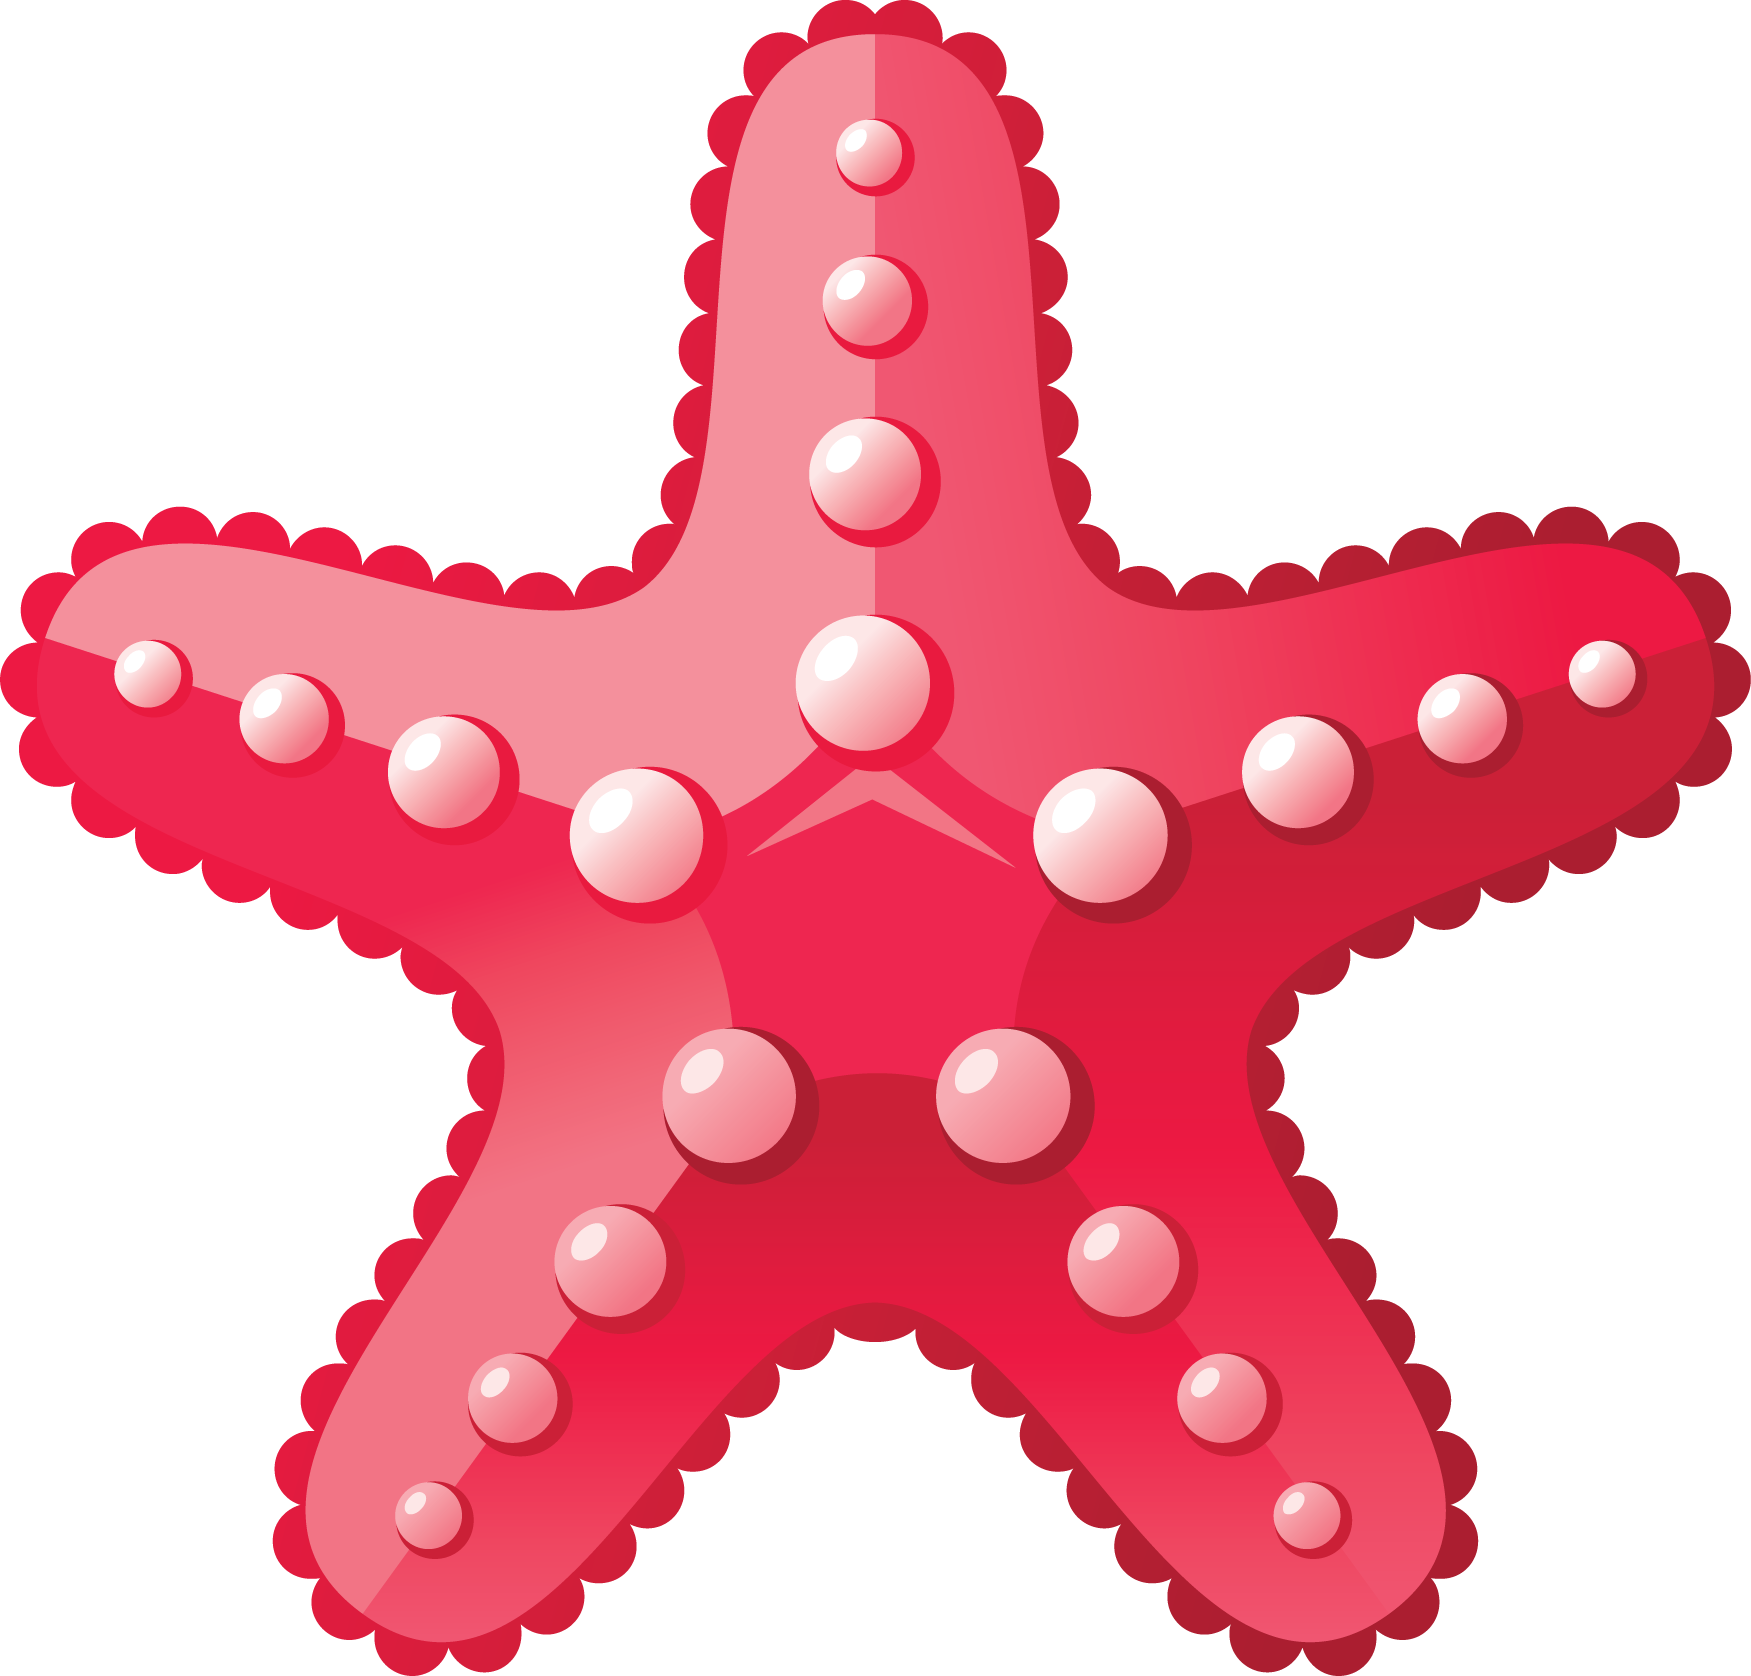 Starfish Png Transparent Image Download Size 1751x1676px